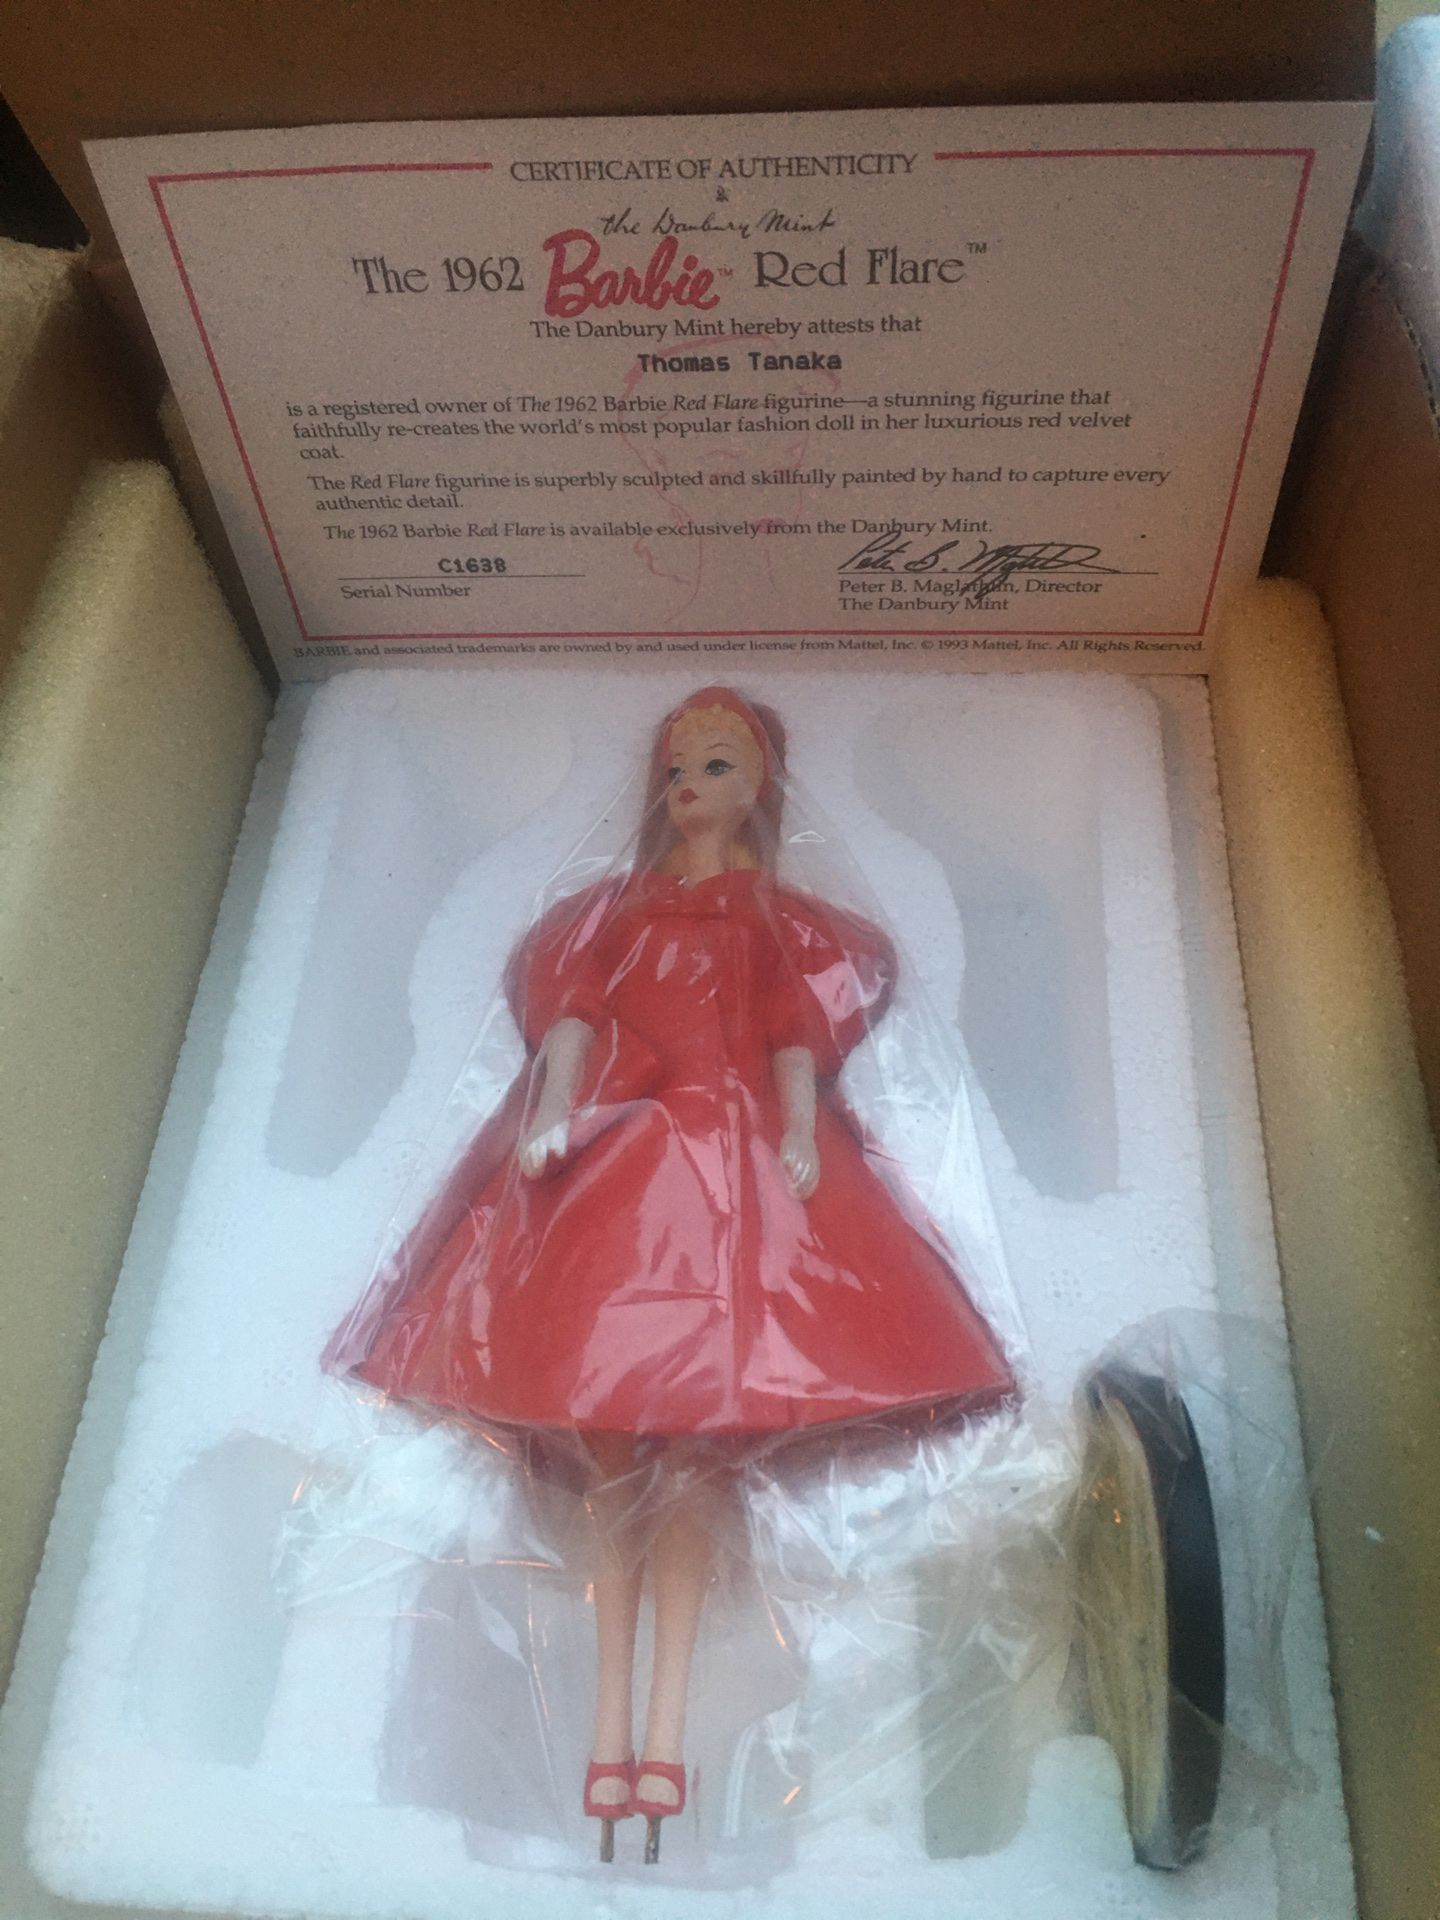 The 1962 Barbie red flare figurine collection